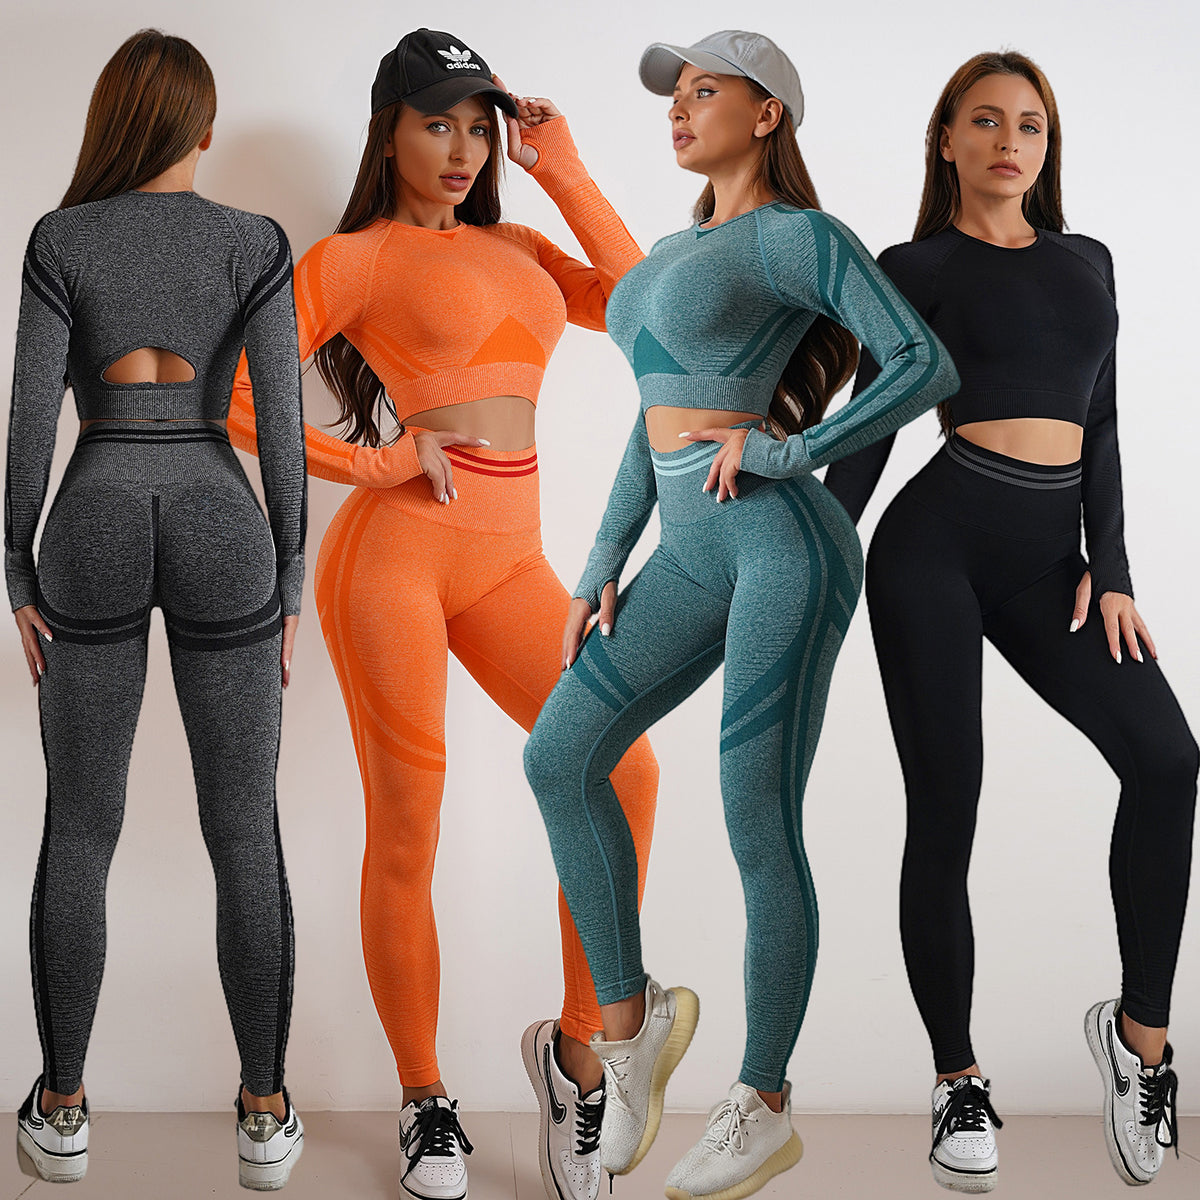 2pcs Seamless Yoga Pants Sports Gym Fitness Leggings And Long Sleeve Tops Outfits Butt Lifting Slim Workout Sportswear Clothing Angelwarriorfitness.com